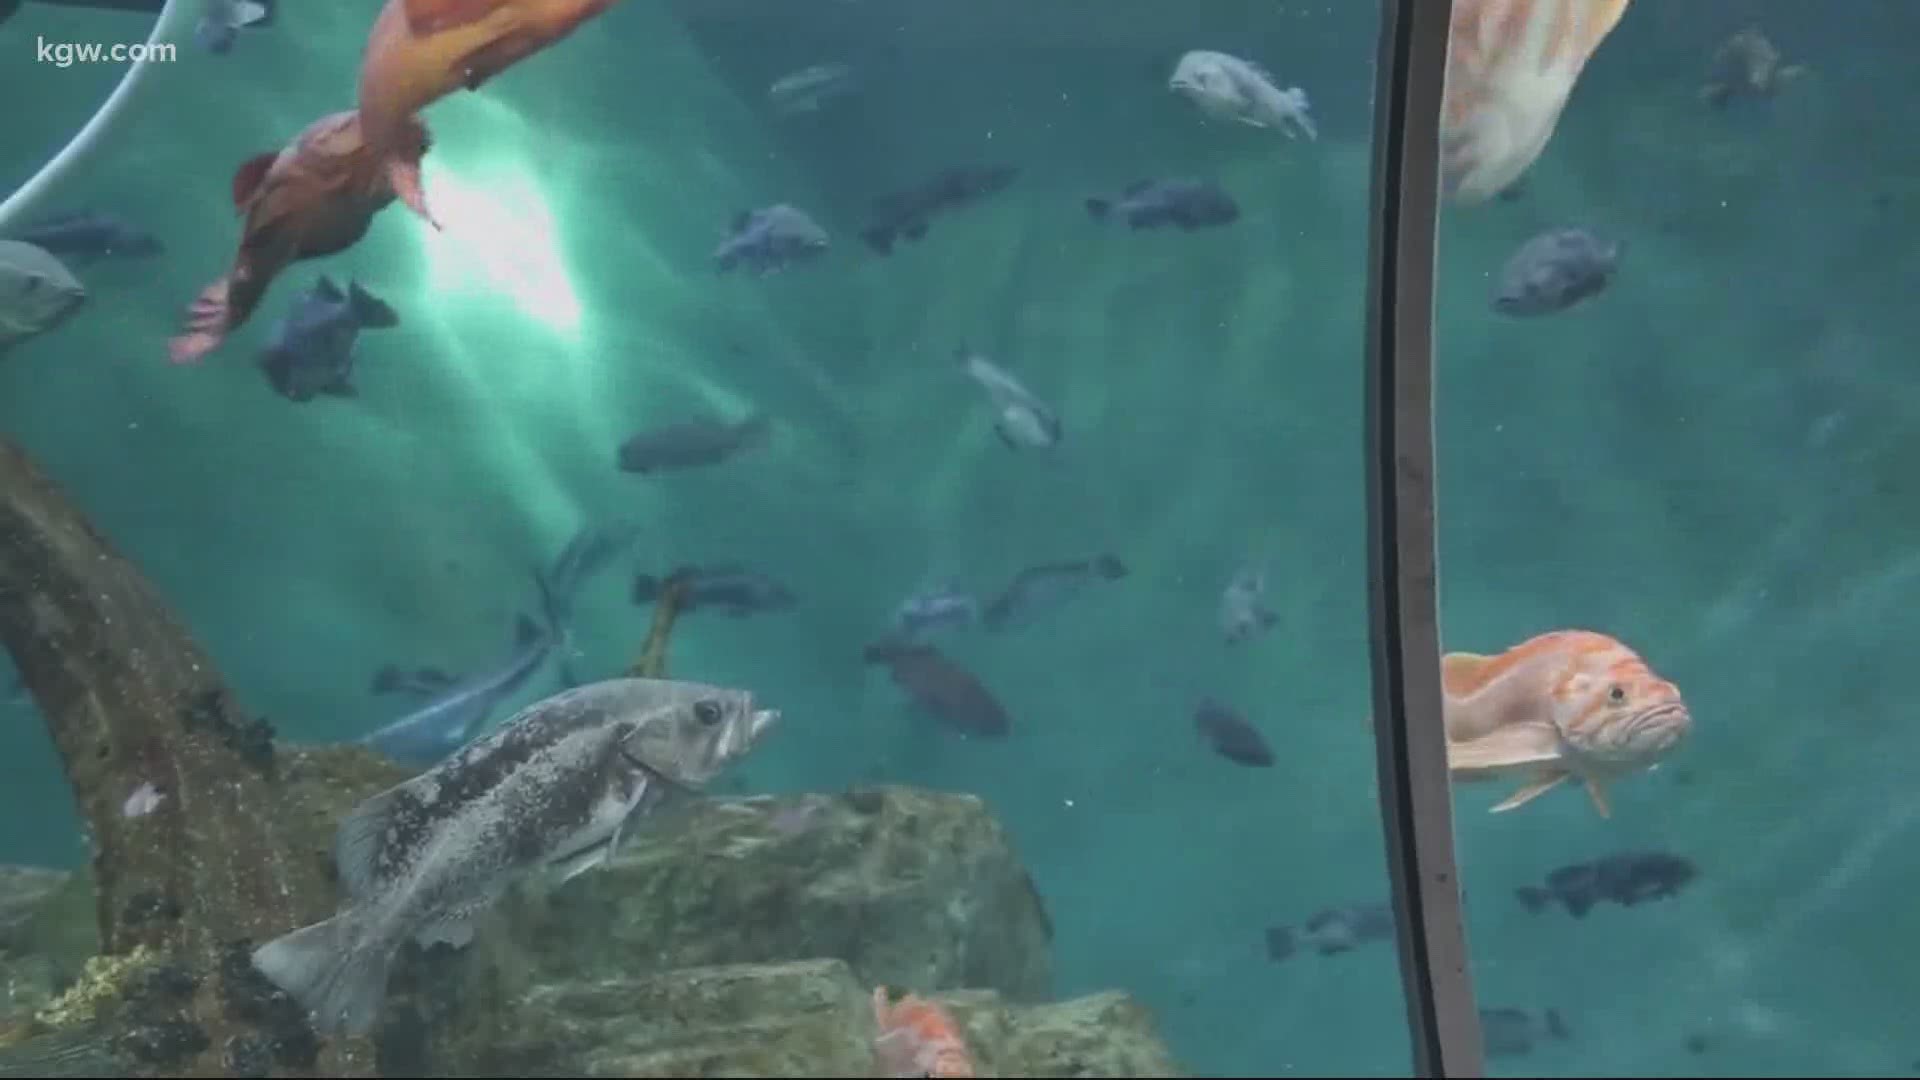 The aquarium hopes to reopen by the end of June with safety measures in place.